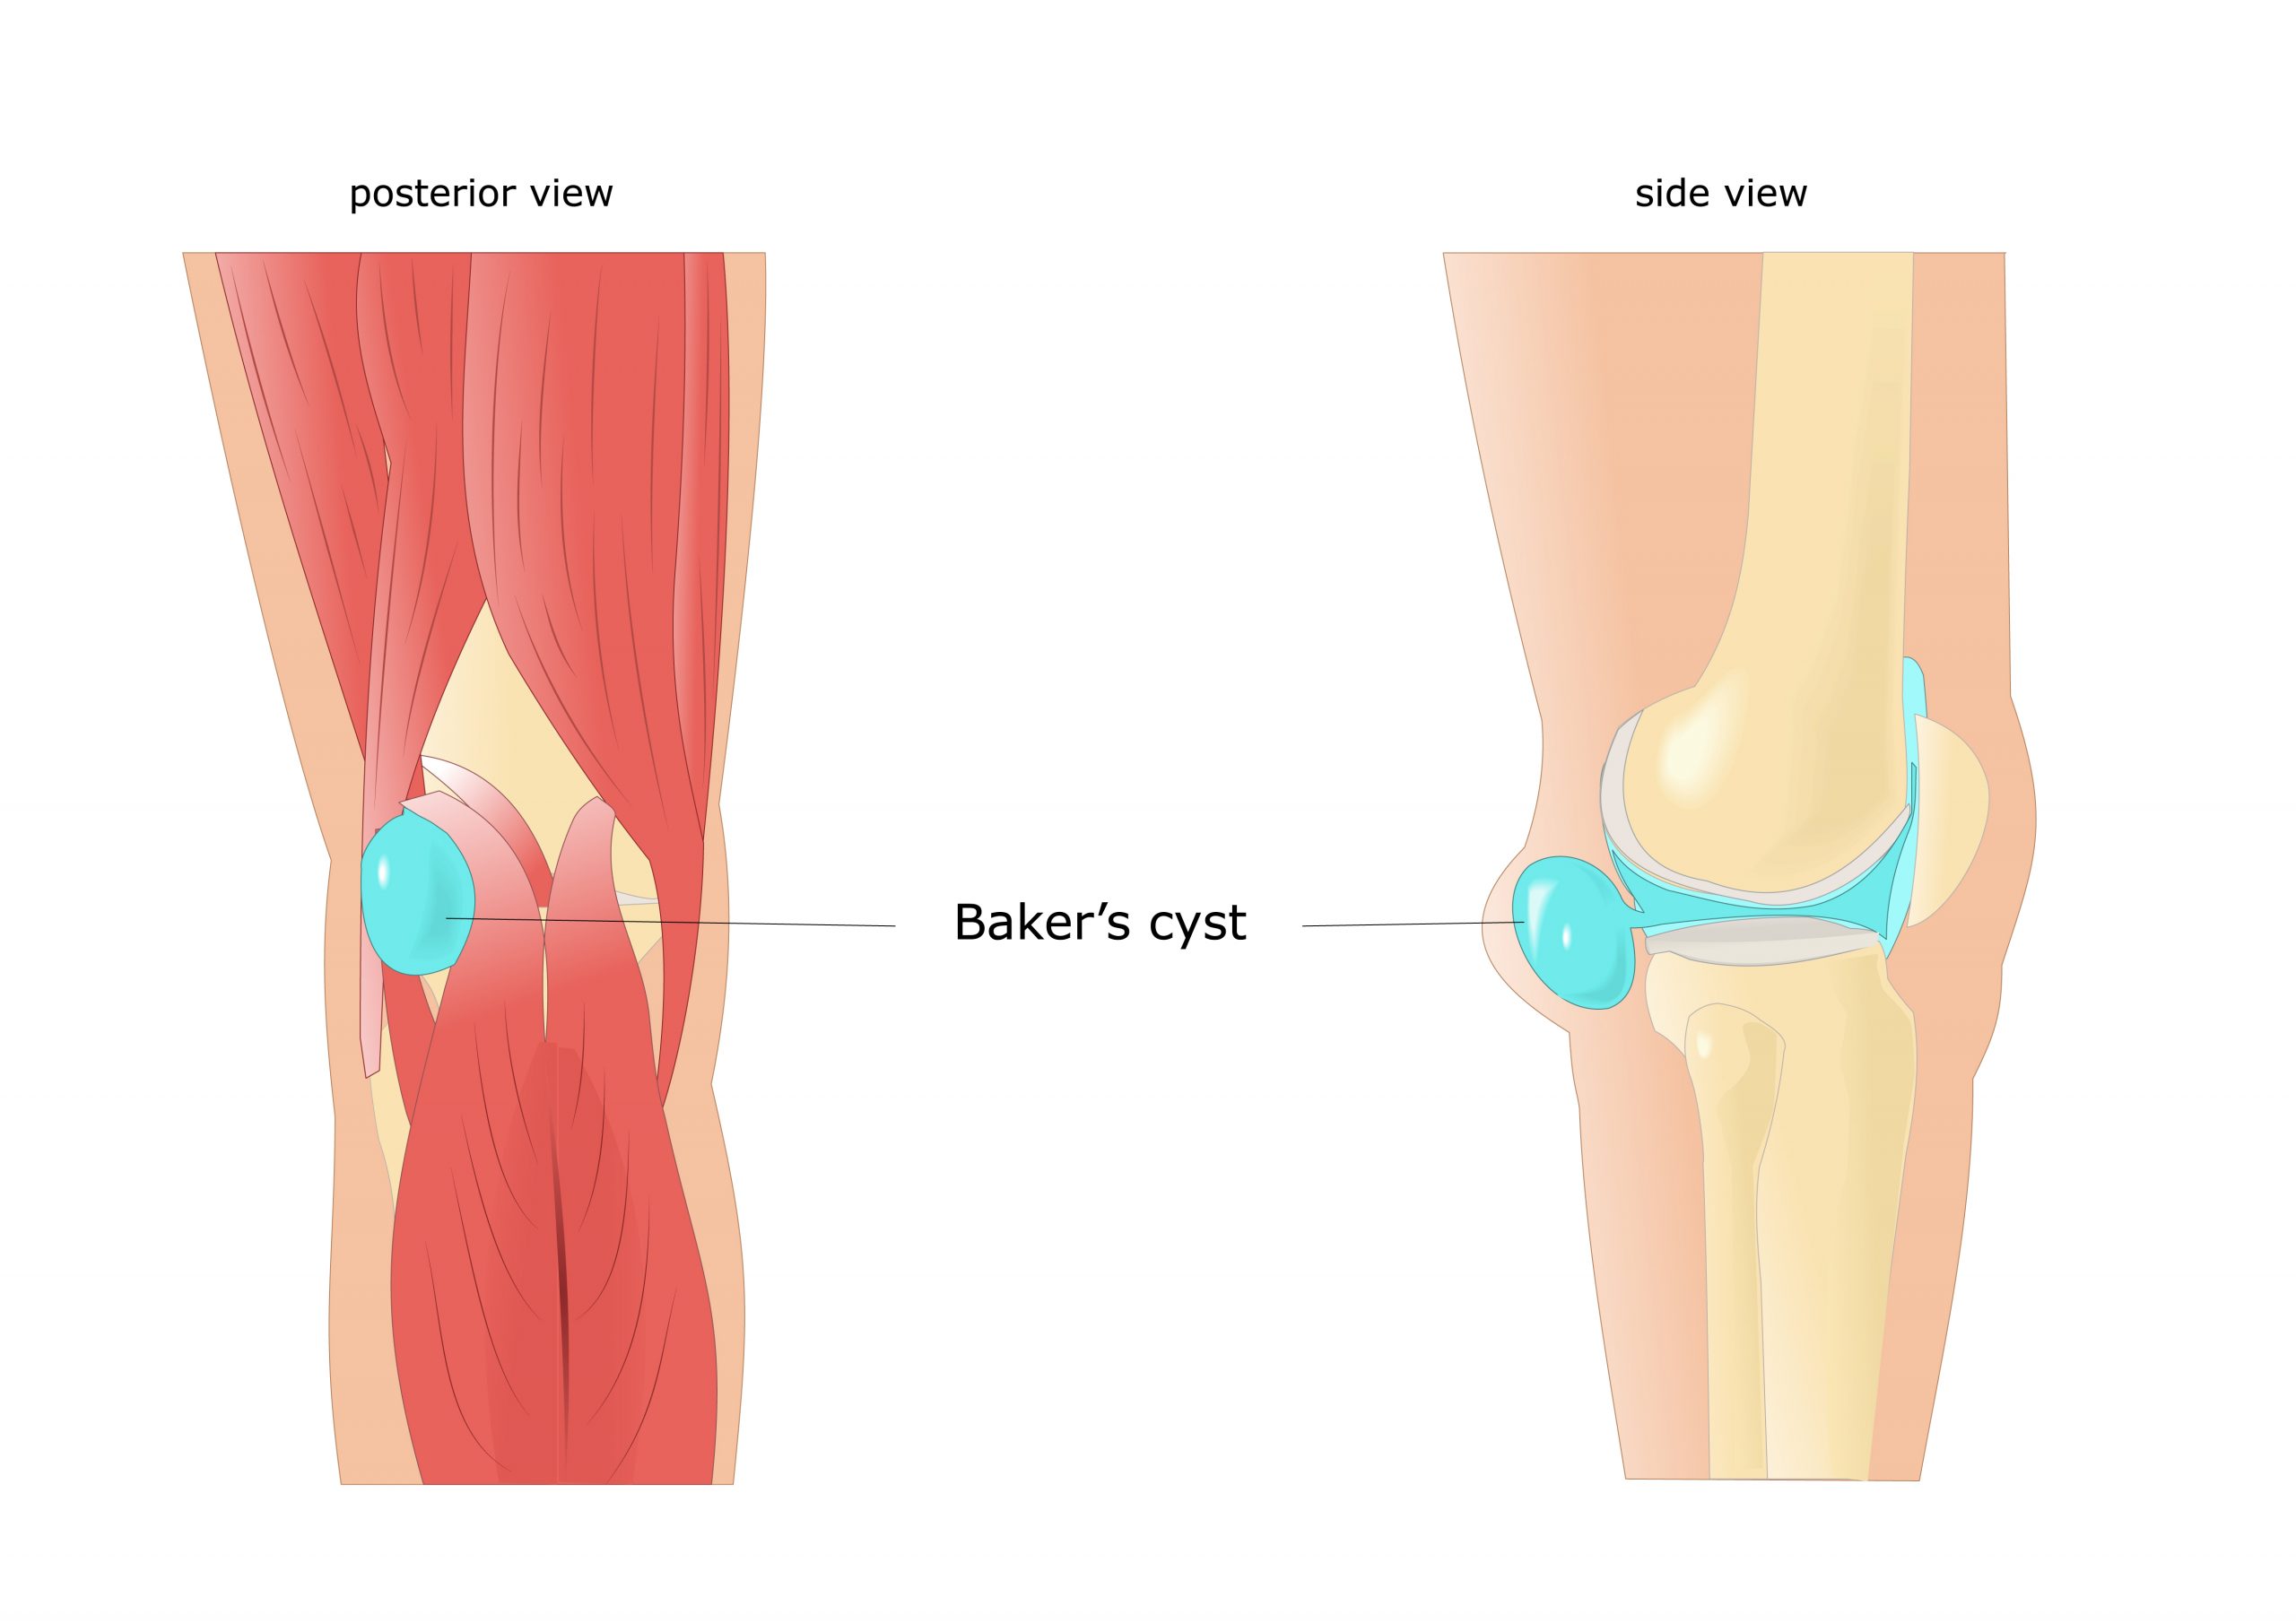 Runners Health Check: What's Causing The Lump Behind Your Knee? – My FootDr